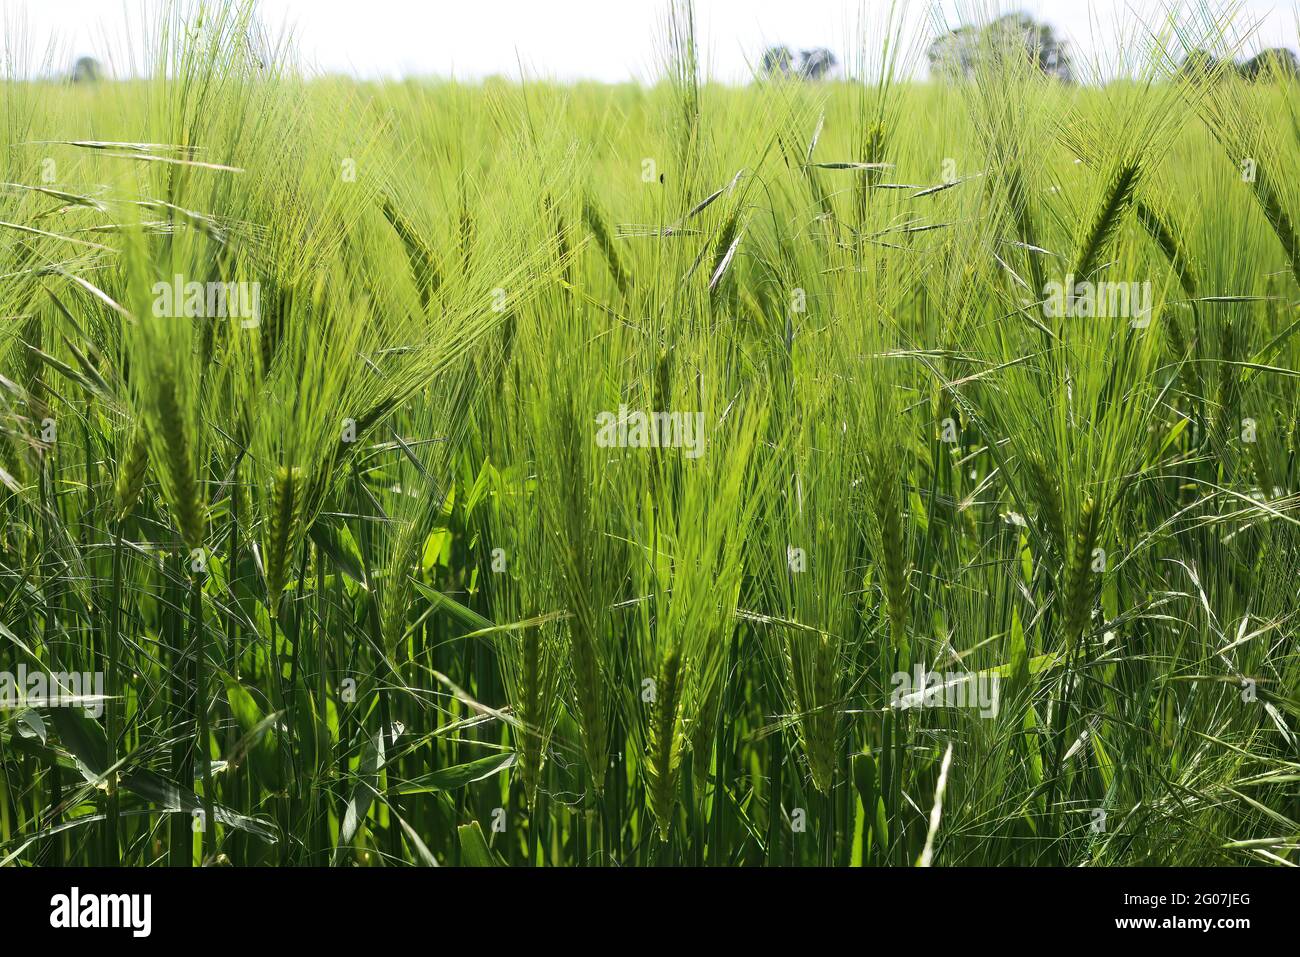 View on field with young green common wheat (triticum aestivum), sky and trees background Stock Photo